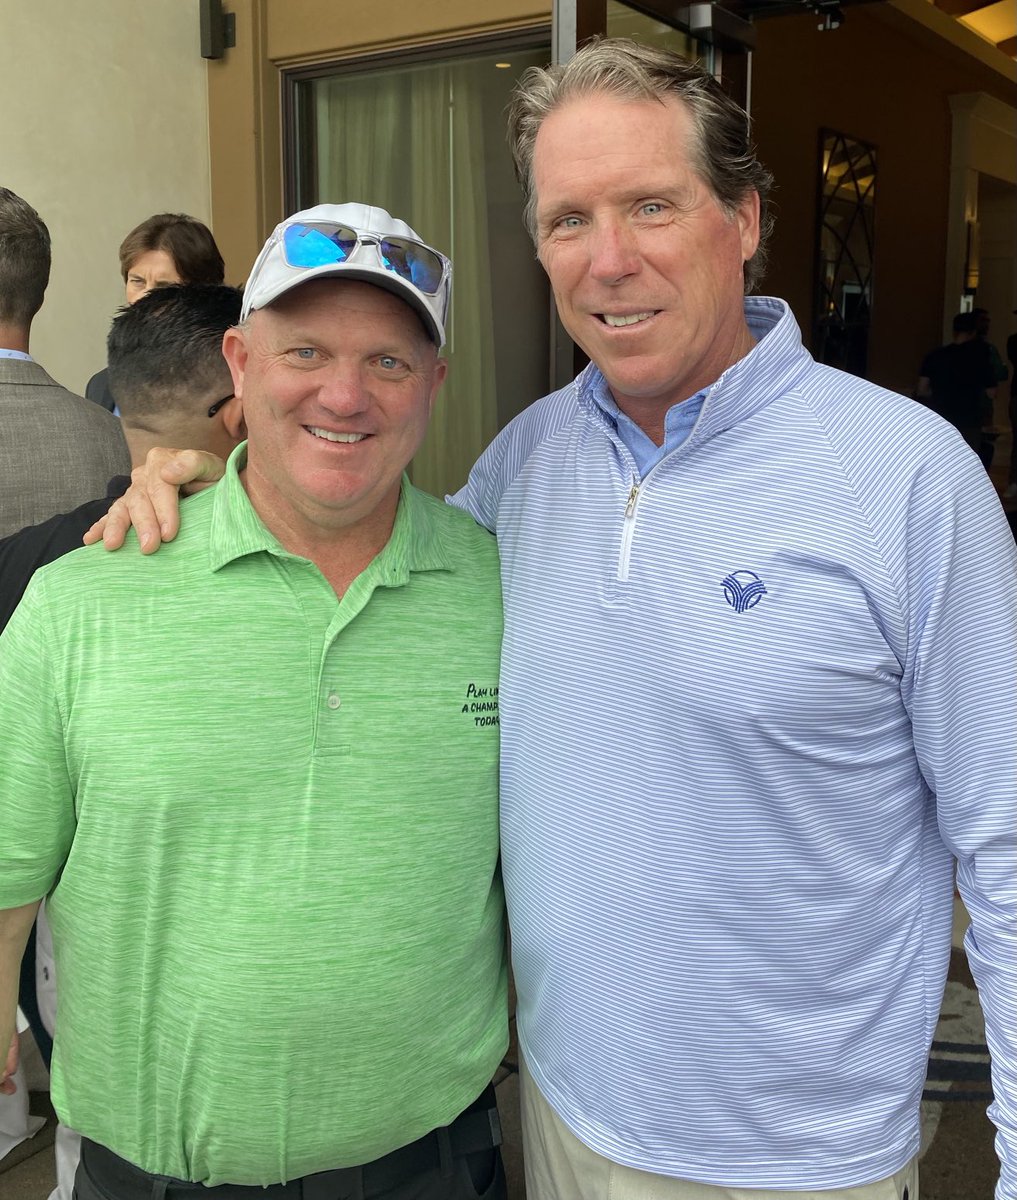 It was great to catch up with my friend, Brian Murphy ⁦@A1Murph yesterday⁩ supporting ⁦@AthletesFirst⁩ and ⁦@stevens_nation⁩ @NDAlumni⁩ #AxeALS